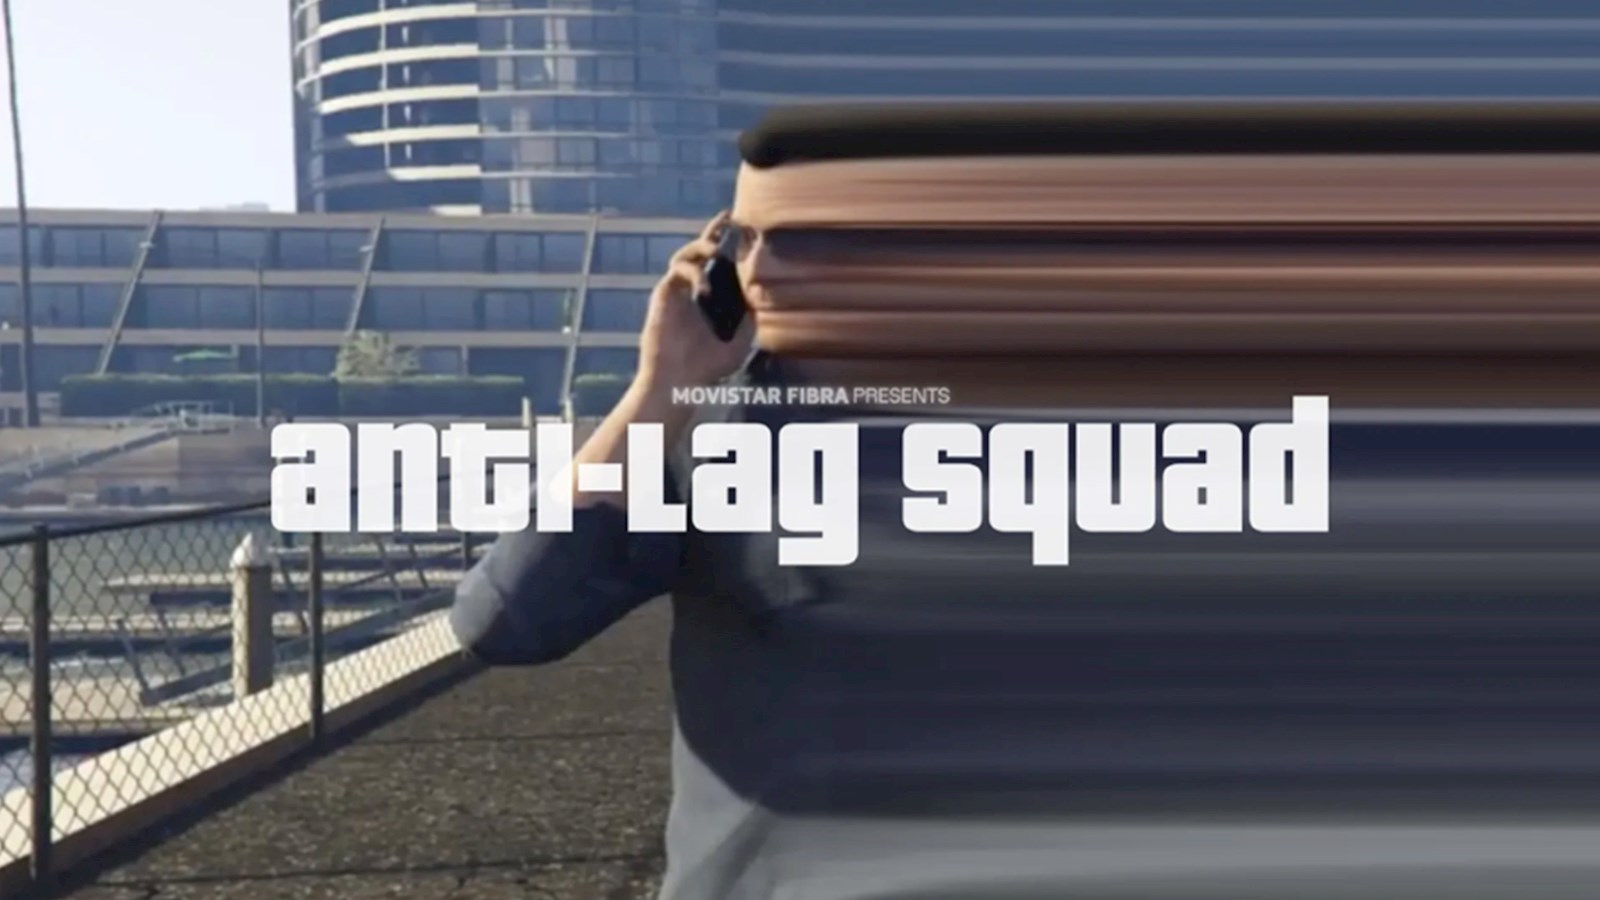 Still from a video game with the text "Anti lag squad" in white